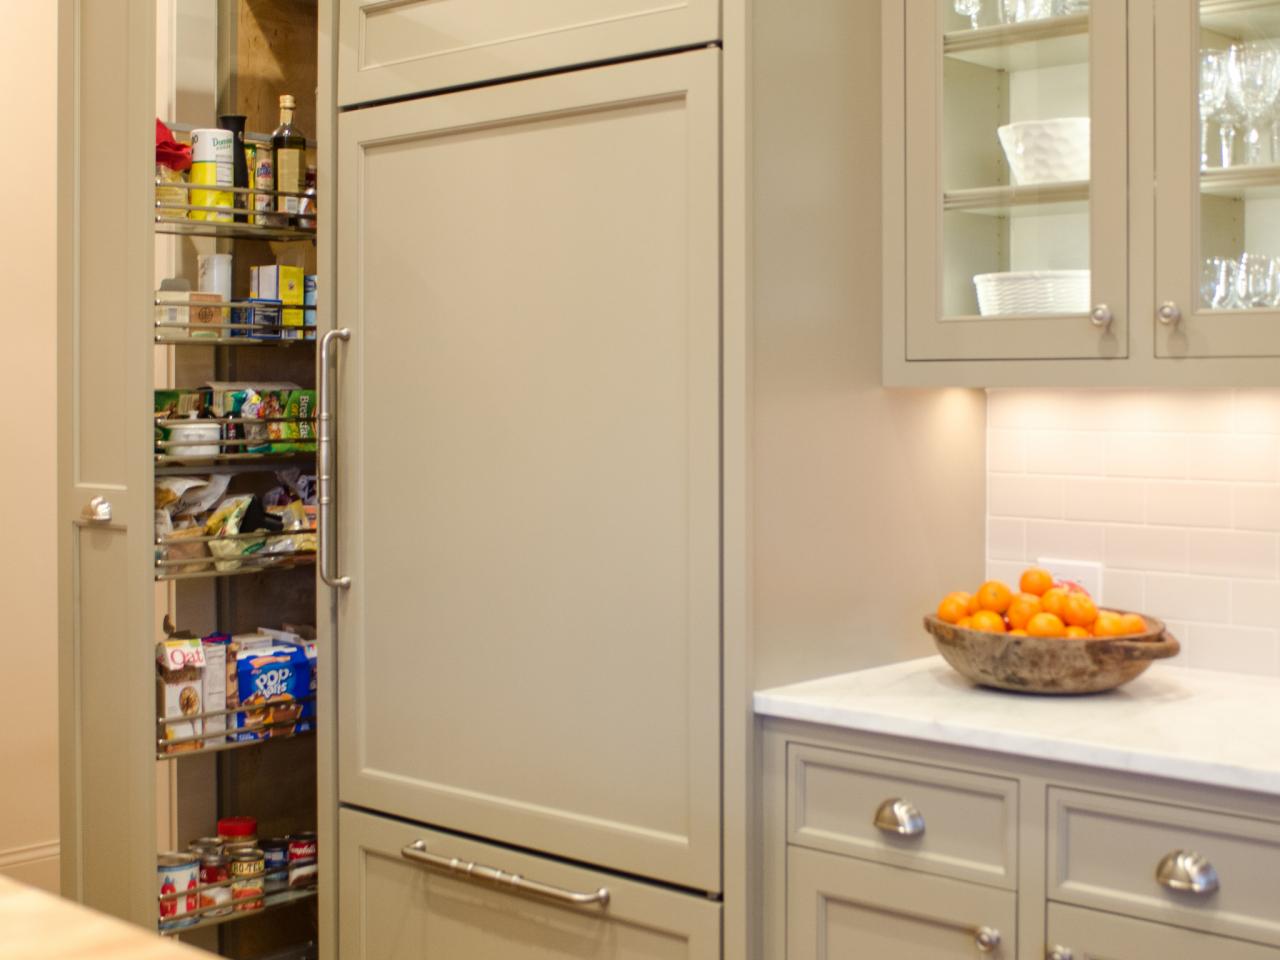 Pantry Cabinet Plans Pictures Options, Ikea Kitchen Storage Cabinets With Doors